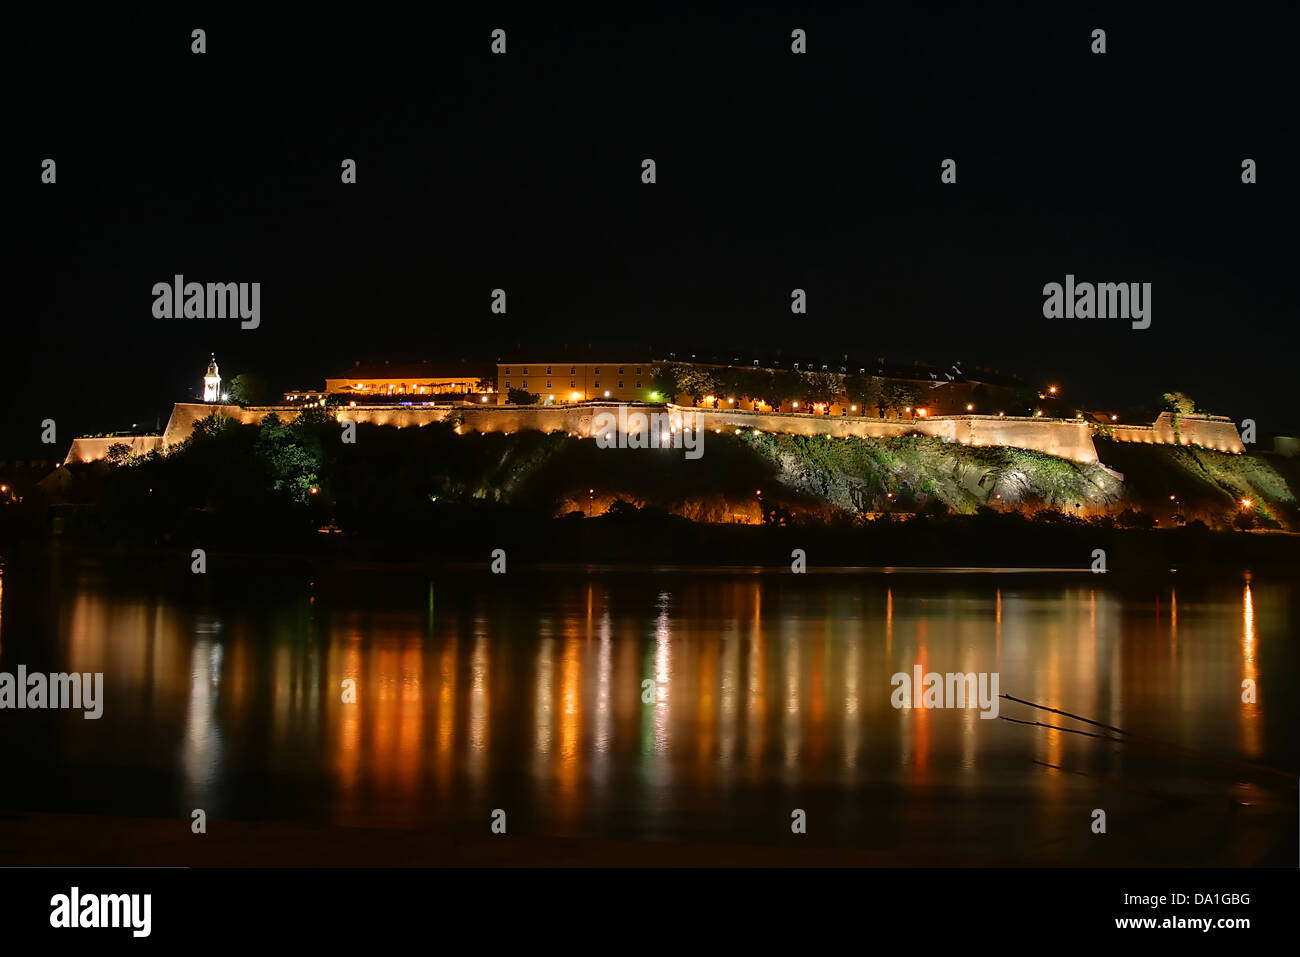 This is a Petrovaradin fortress on river Danube, by night, view from Novi Sad, this is a place of Exit festival in Serbia Stock Photo